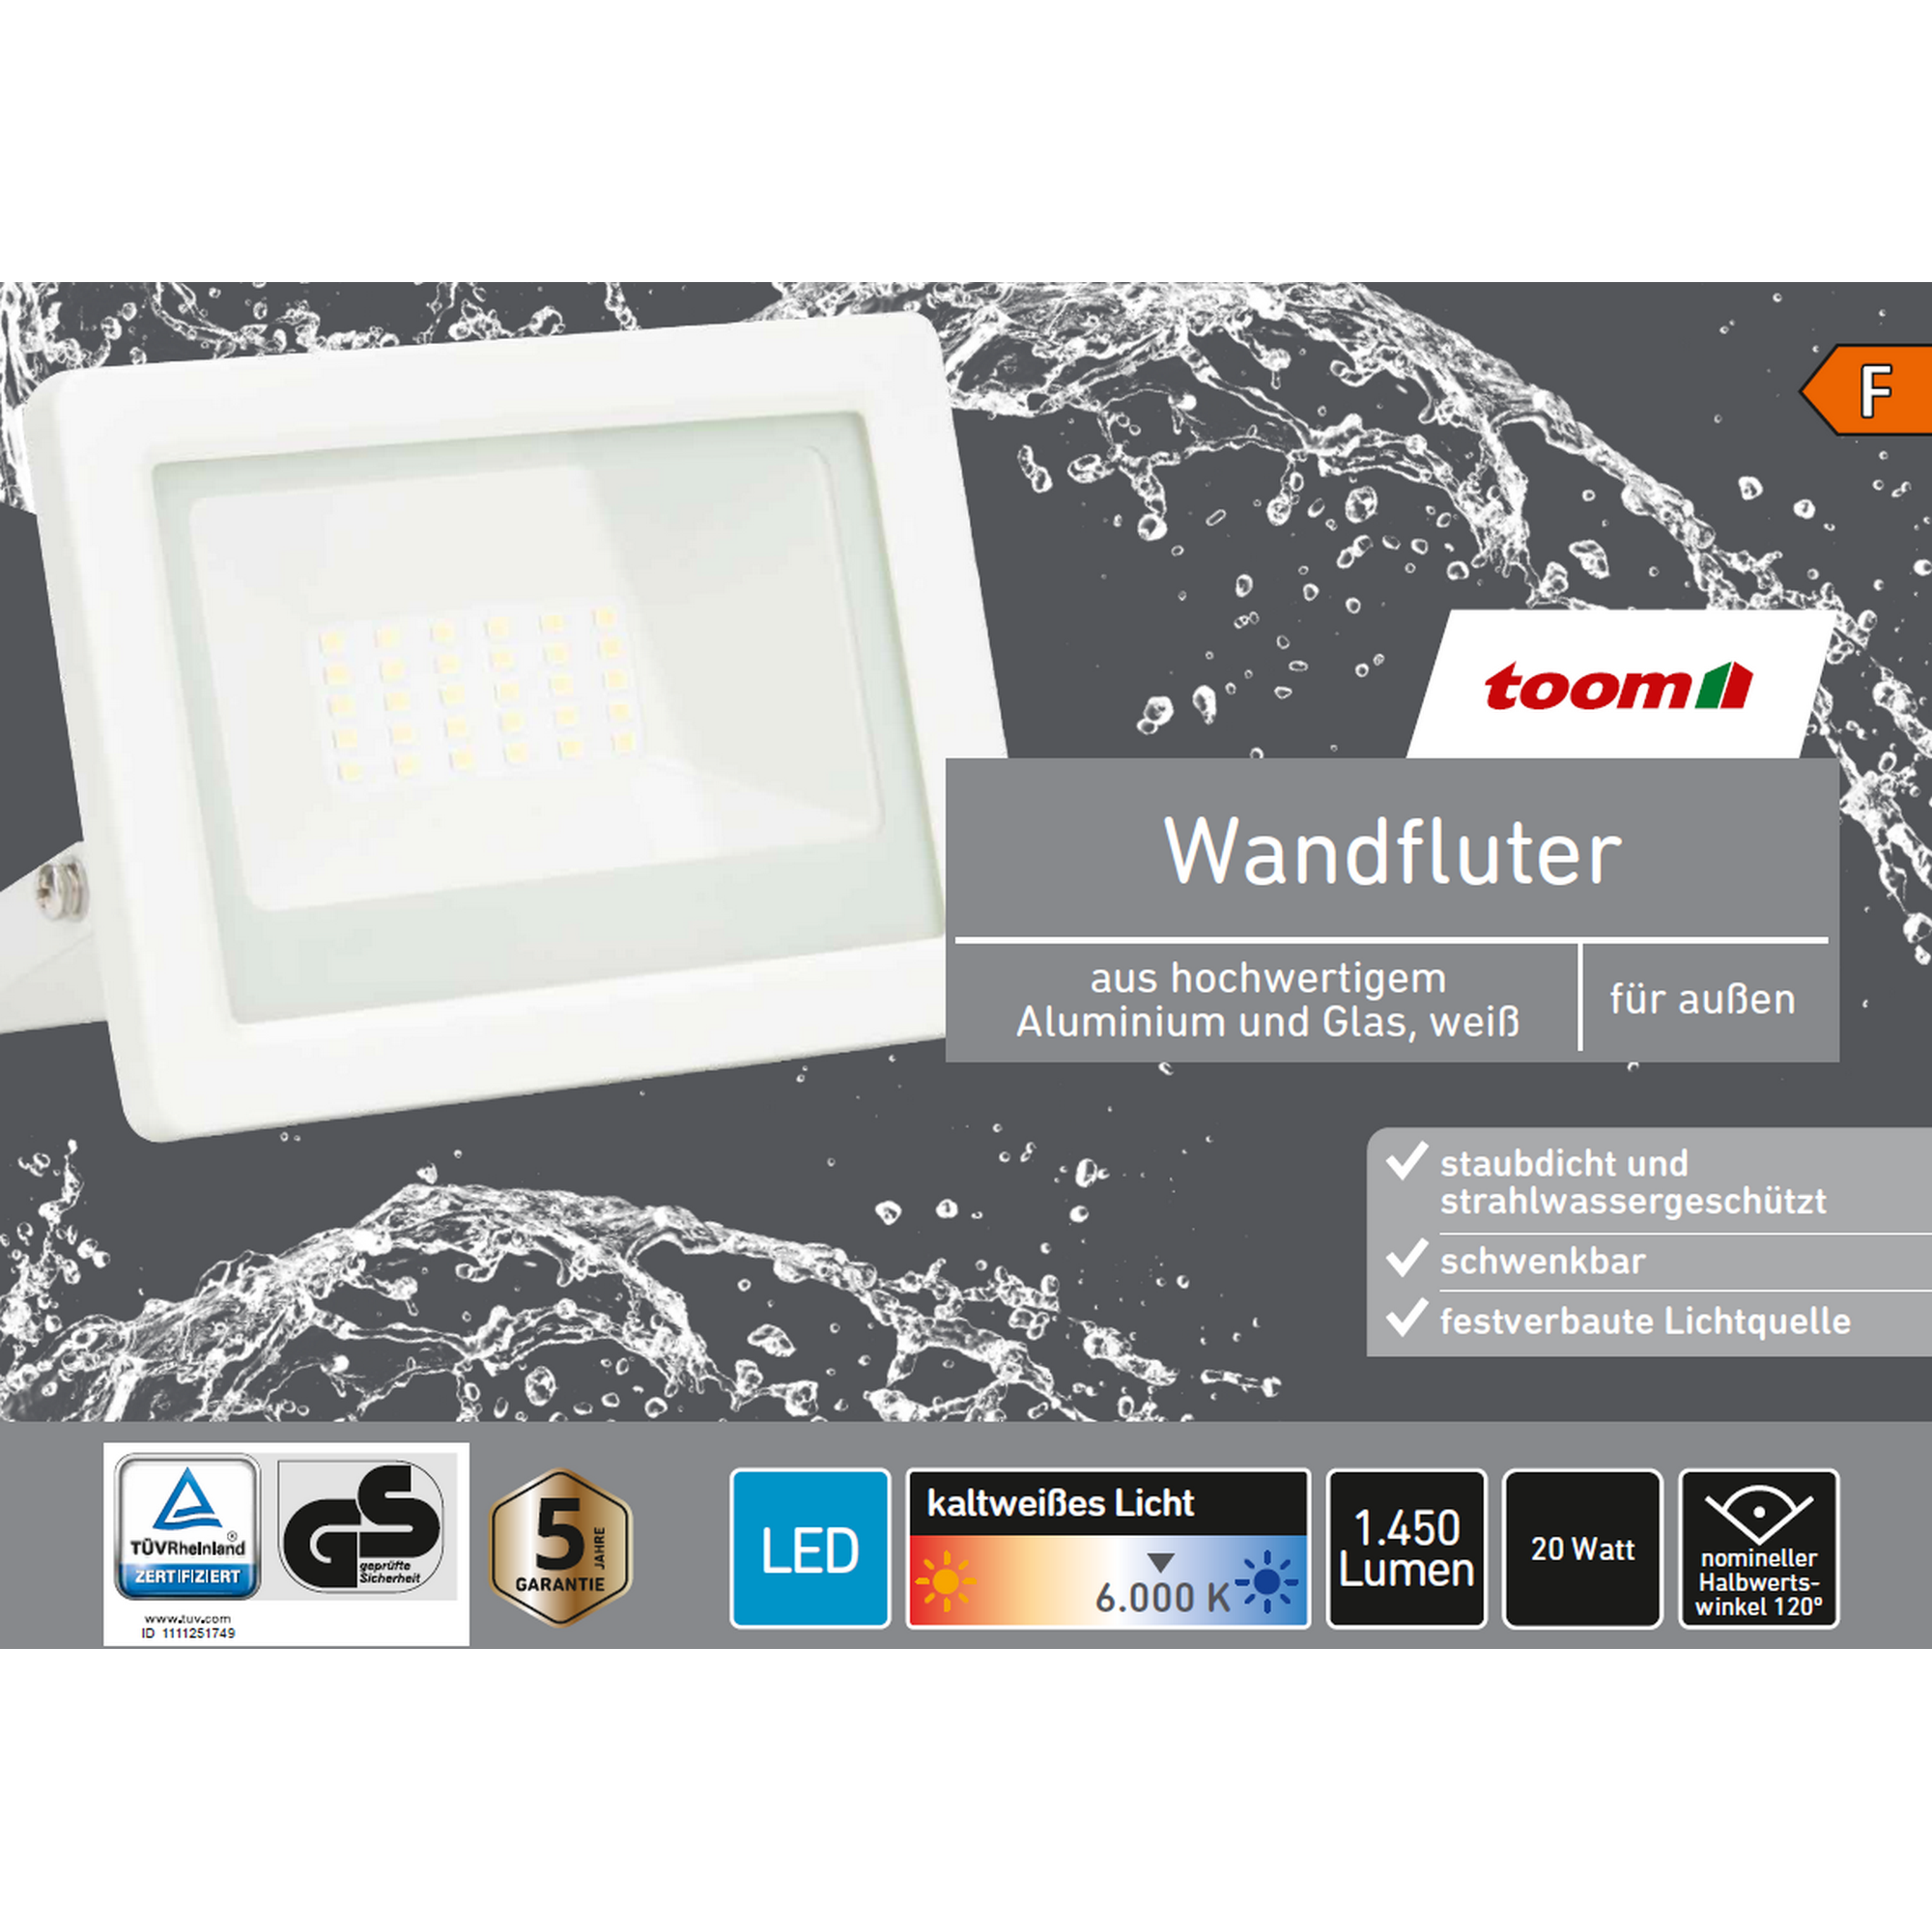 LED-Wandfluter weiß 20 W 1450 lm + product picture